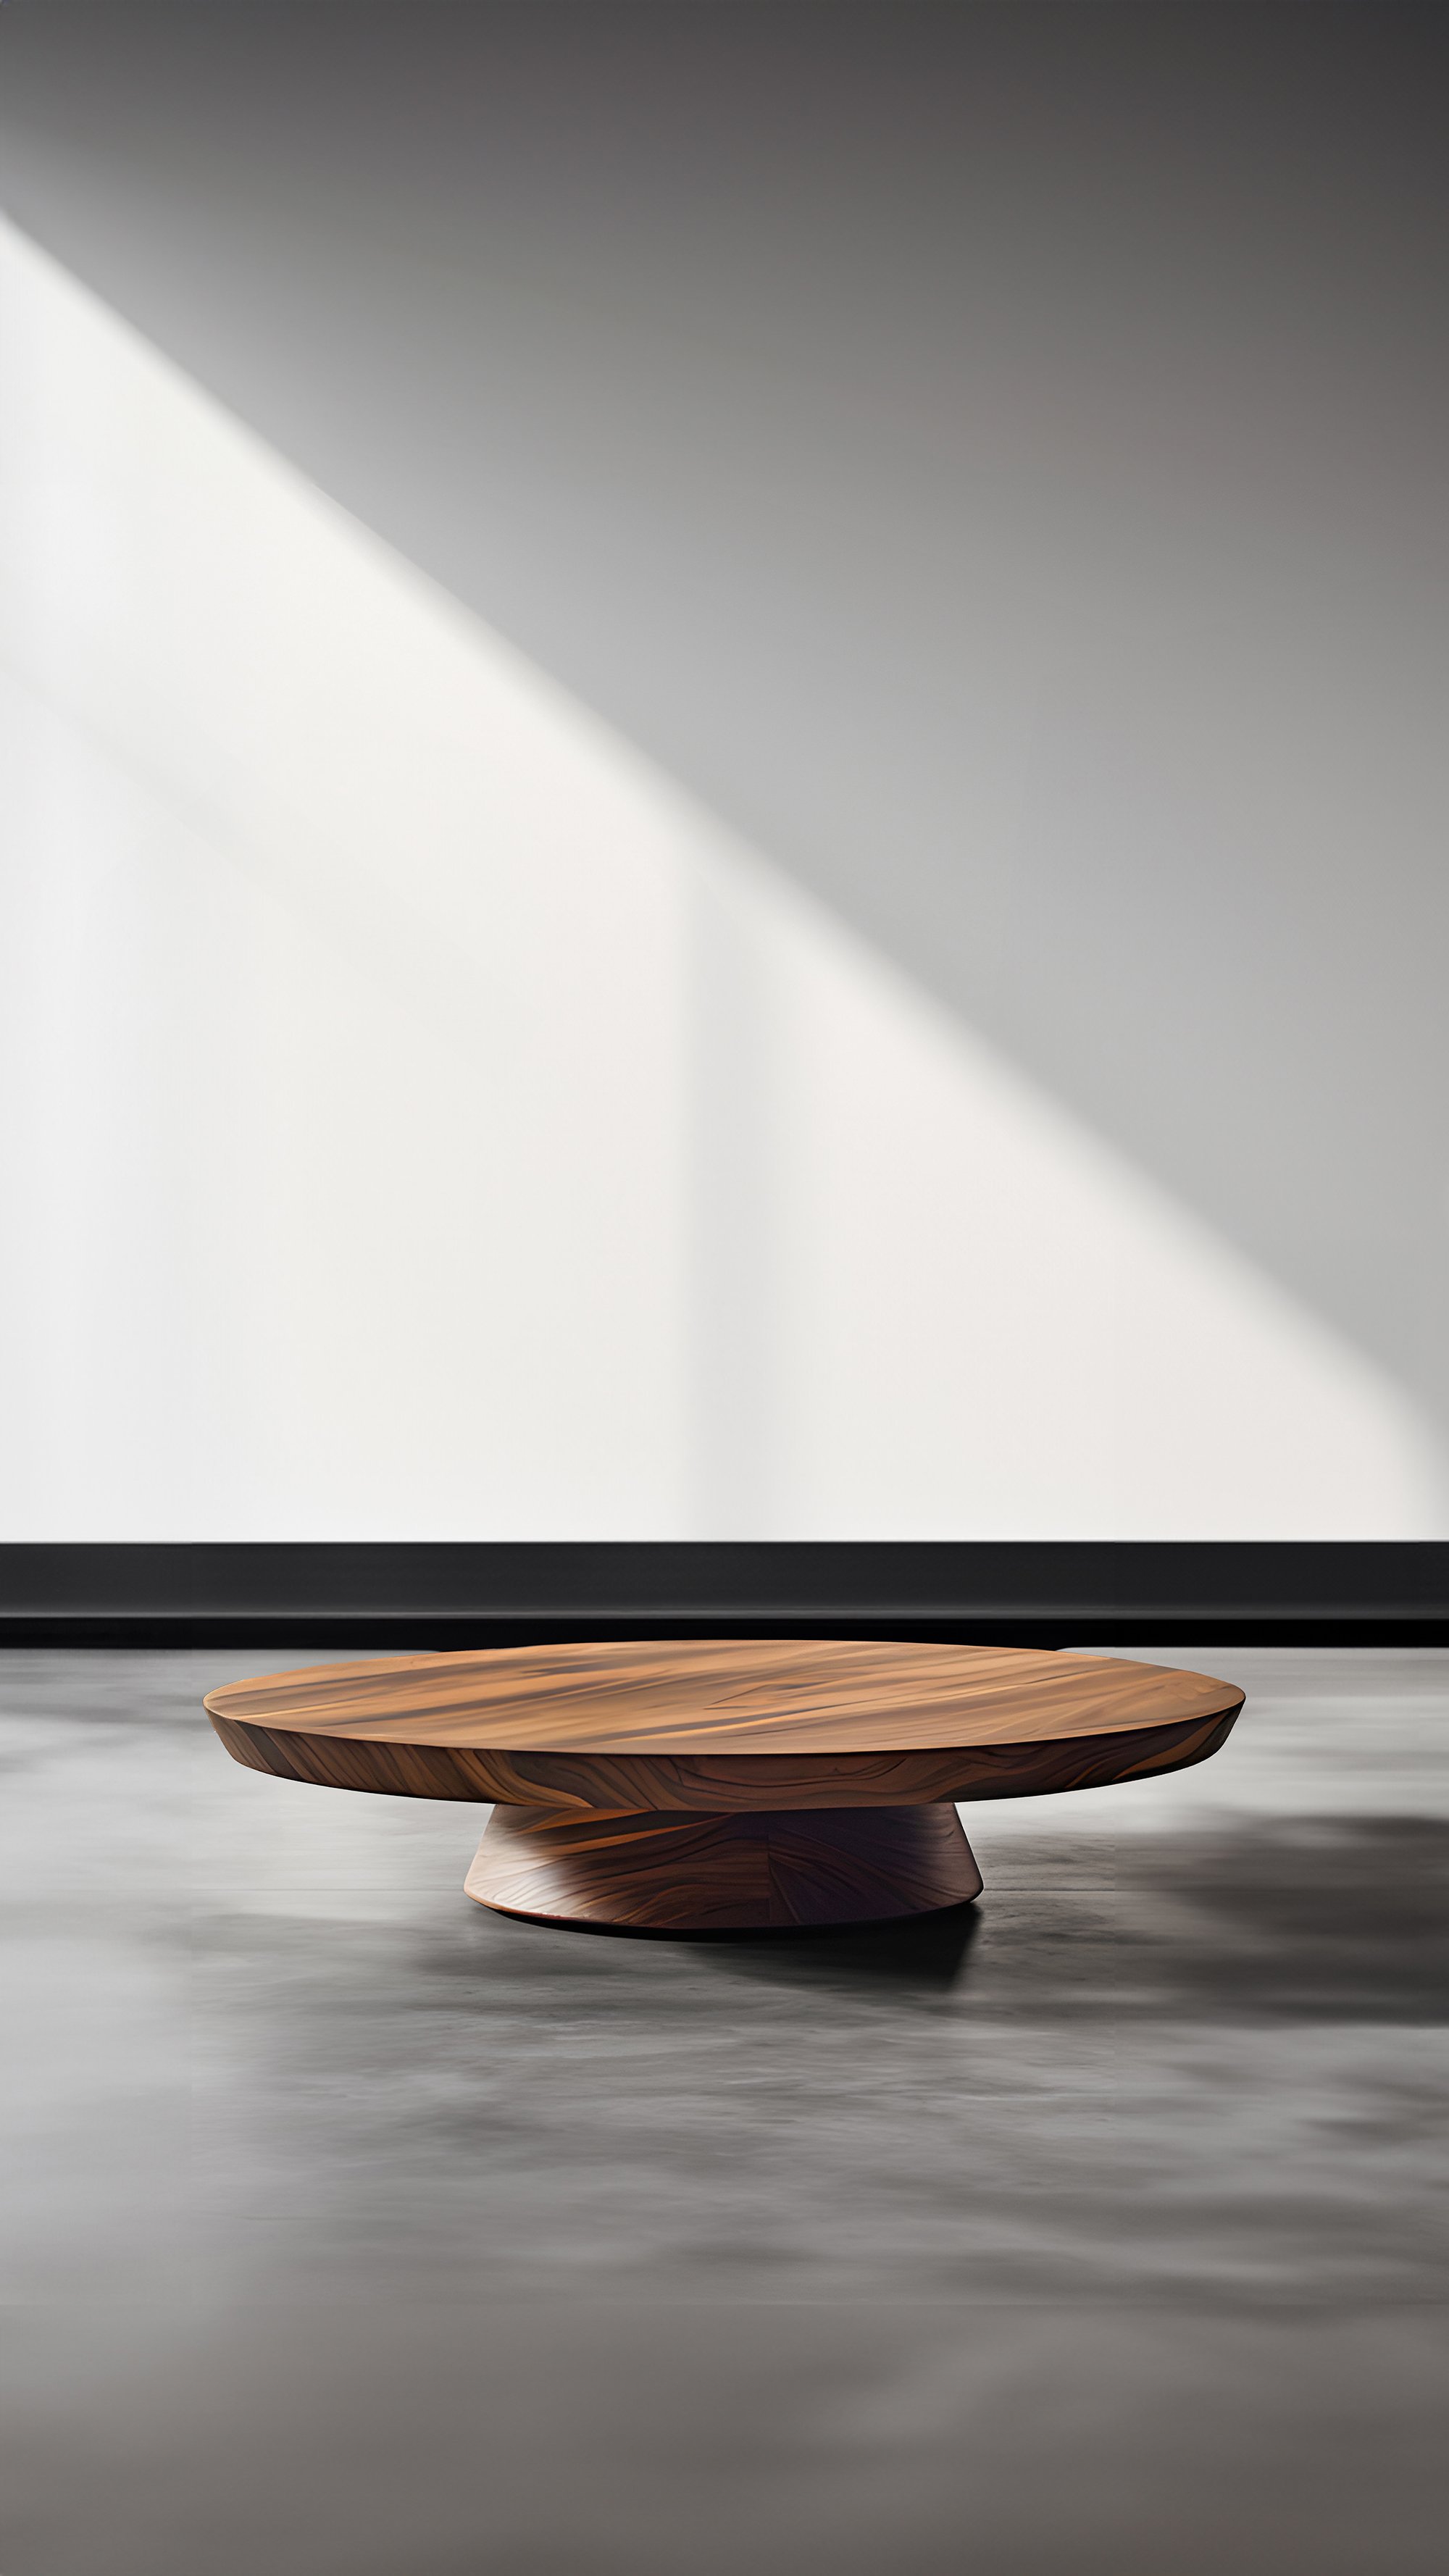 Sculptural Coffee Table Made of Solid Wood, Center Table Solace S48 by Joel Escalona — 6.jpg